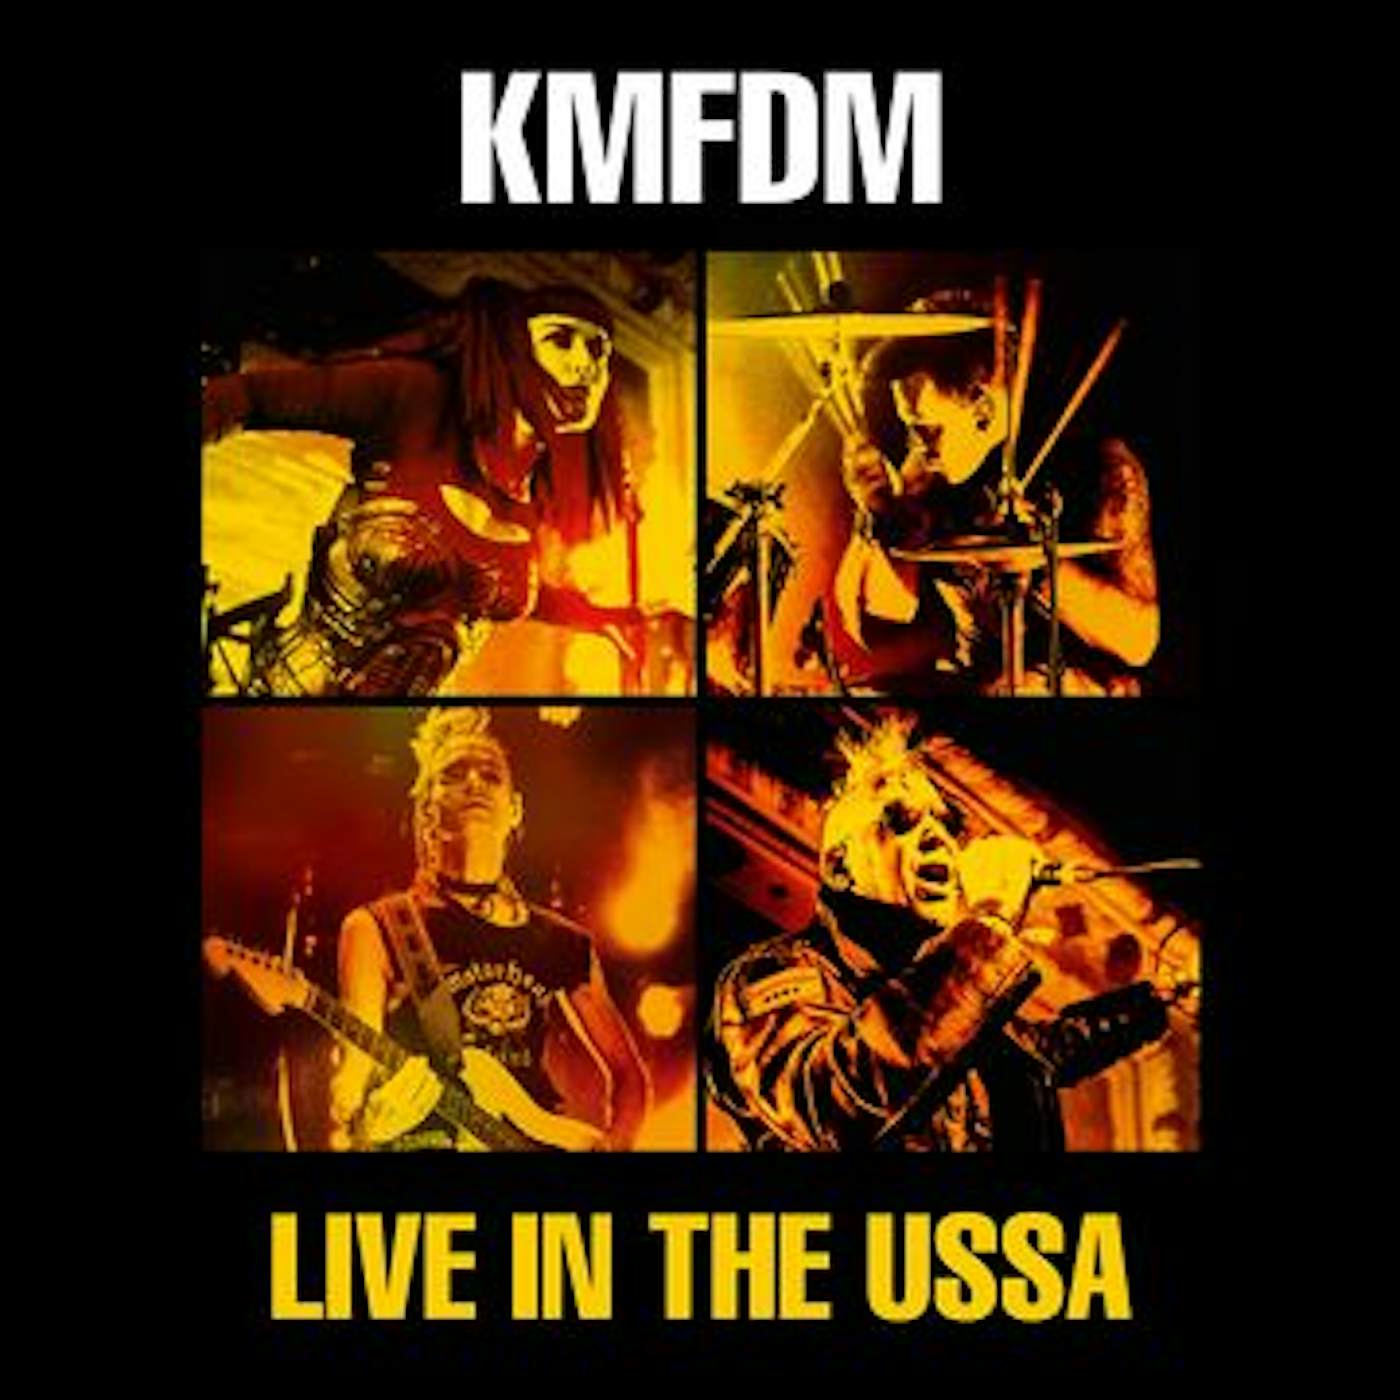 KMFDM LIVE IN THE USSA CD